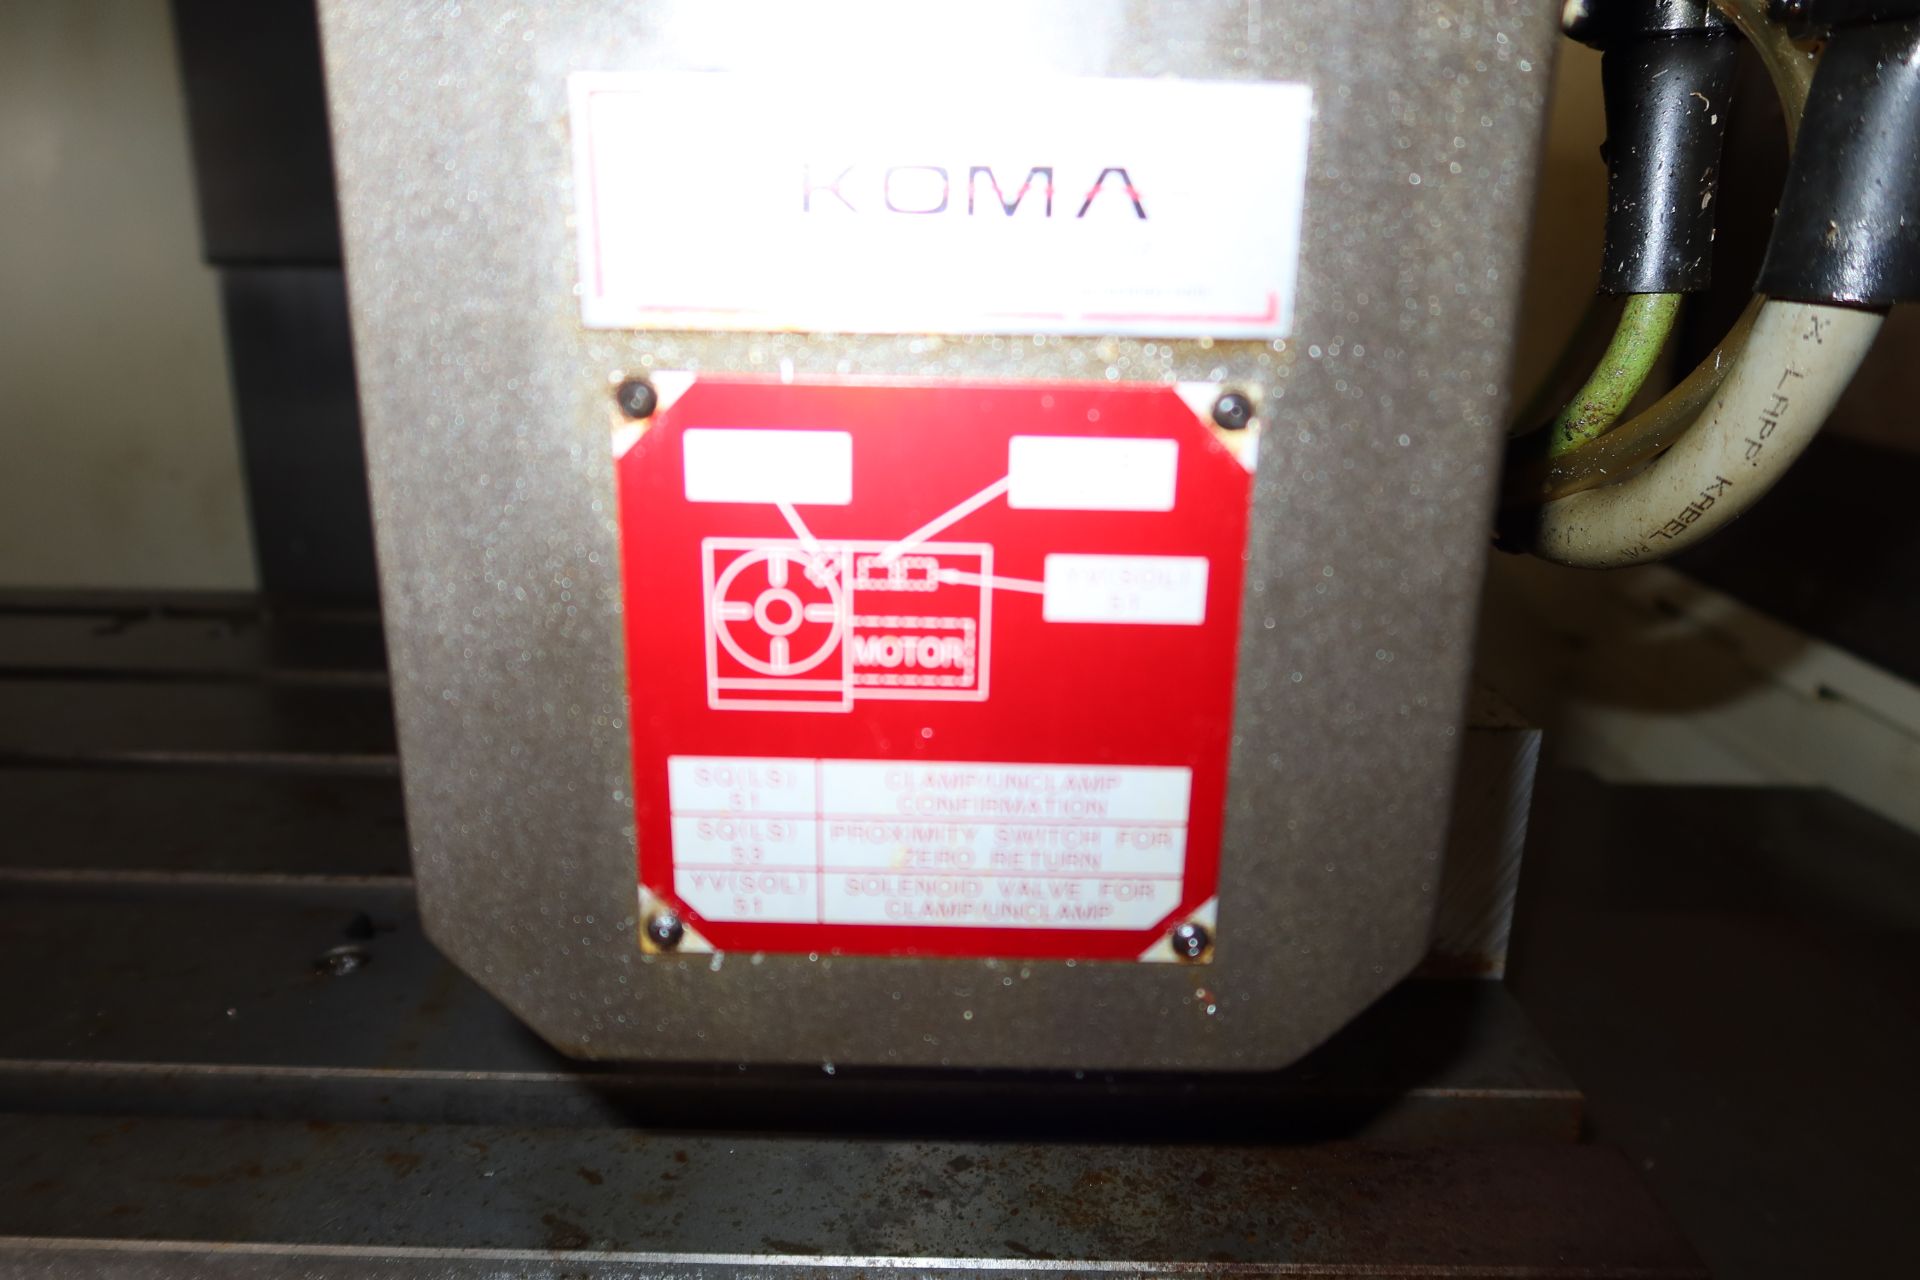 2015 KITAMURA MYCENTER 3XD CNC VERTICAL MACHINING CENTER W/KOMA 4TH AXIS, 12000 RPM SPINDLE, 24-TOOL - Image 5 of 6